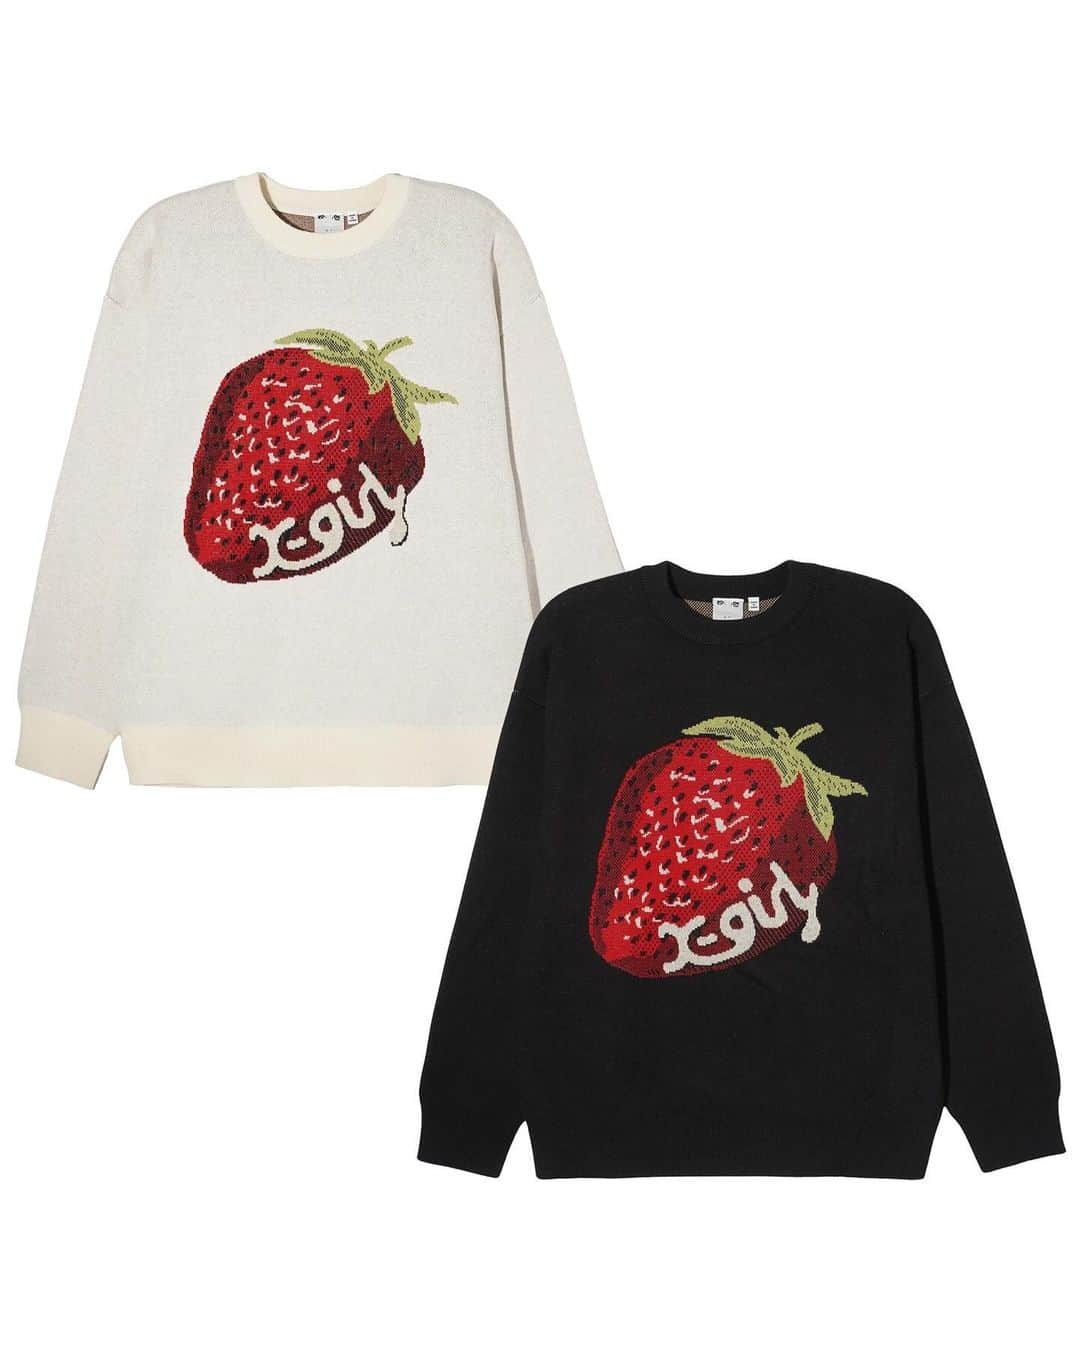 X-girlのインスタグラム：「． 11/3(Fri.) NEW ARRIVAL  ① STRAWBERRY KNIT TOP ¥13,200(税込) ② JACQUARD KNIT TOP ¥13,200(税込) ③ CROPPED RIB KNIT TOP ¥9,900(税込) ④ TURTLENECK RIB KNIT TOP ¥9,900(税込) ⑤ SIDE ZIP DENIM PANTS ¥15,400(税込) ⑥ QUILTED STAR TOTE BAG ¥6,050(税込) ⑦ SACOCHE ¥6,600(税込) ⑧ QUILTED STAR POUCH ¥5,500(税込) ⑨ FAUX LEATHER MULTI CARD CASE ¥5,500(税込) ⑩ FAUX LEATHER ZIP MINI WALLET ¥5,500(税込)  #xgirl #xgirljp #エックスガール」